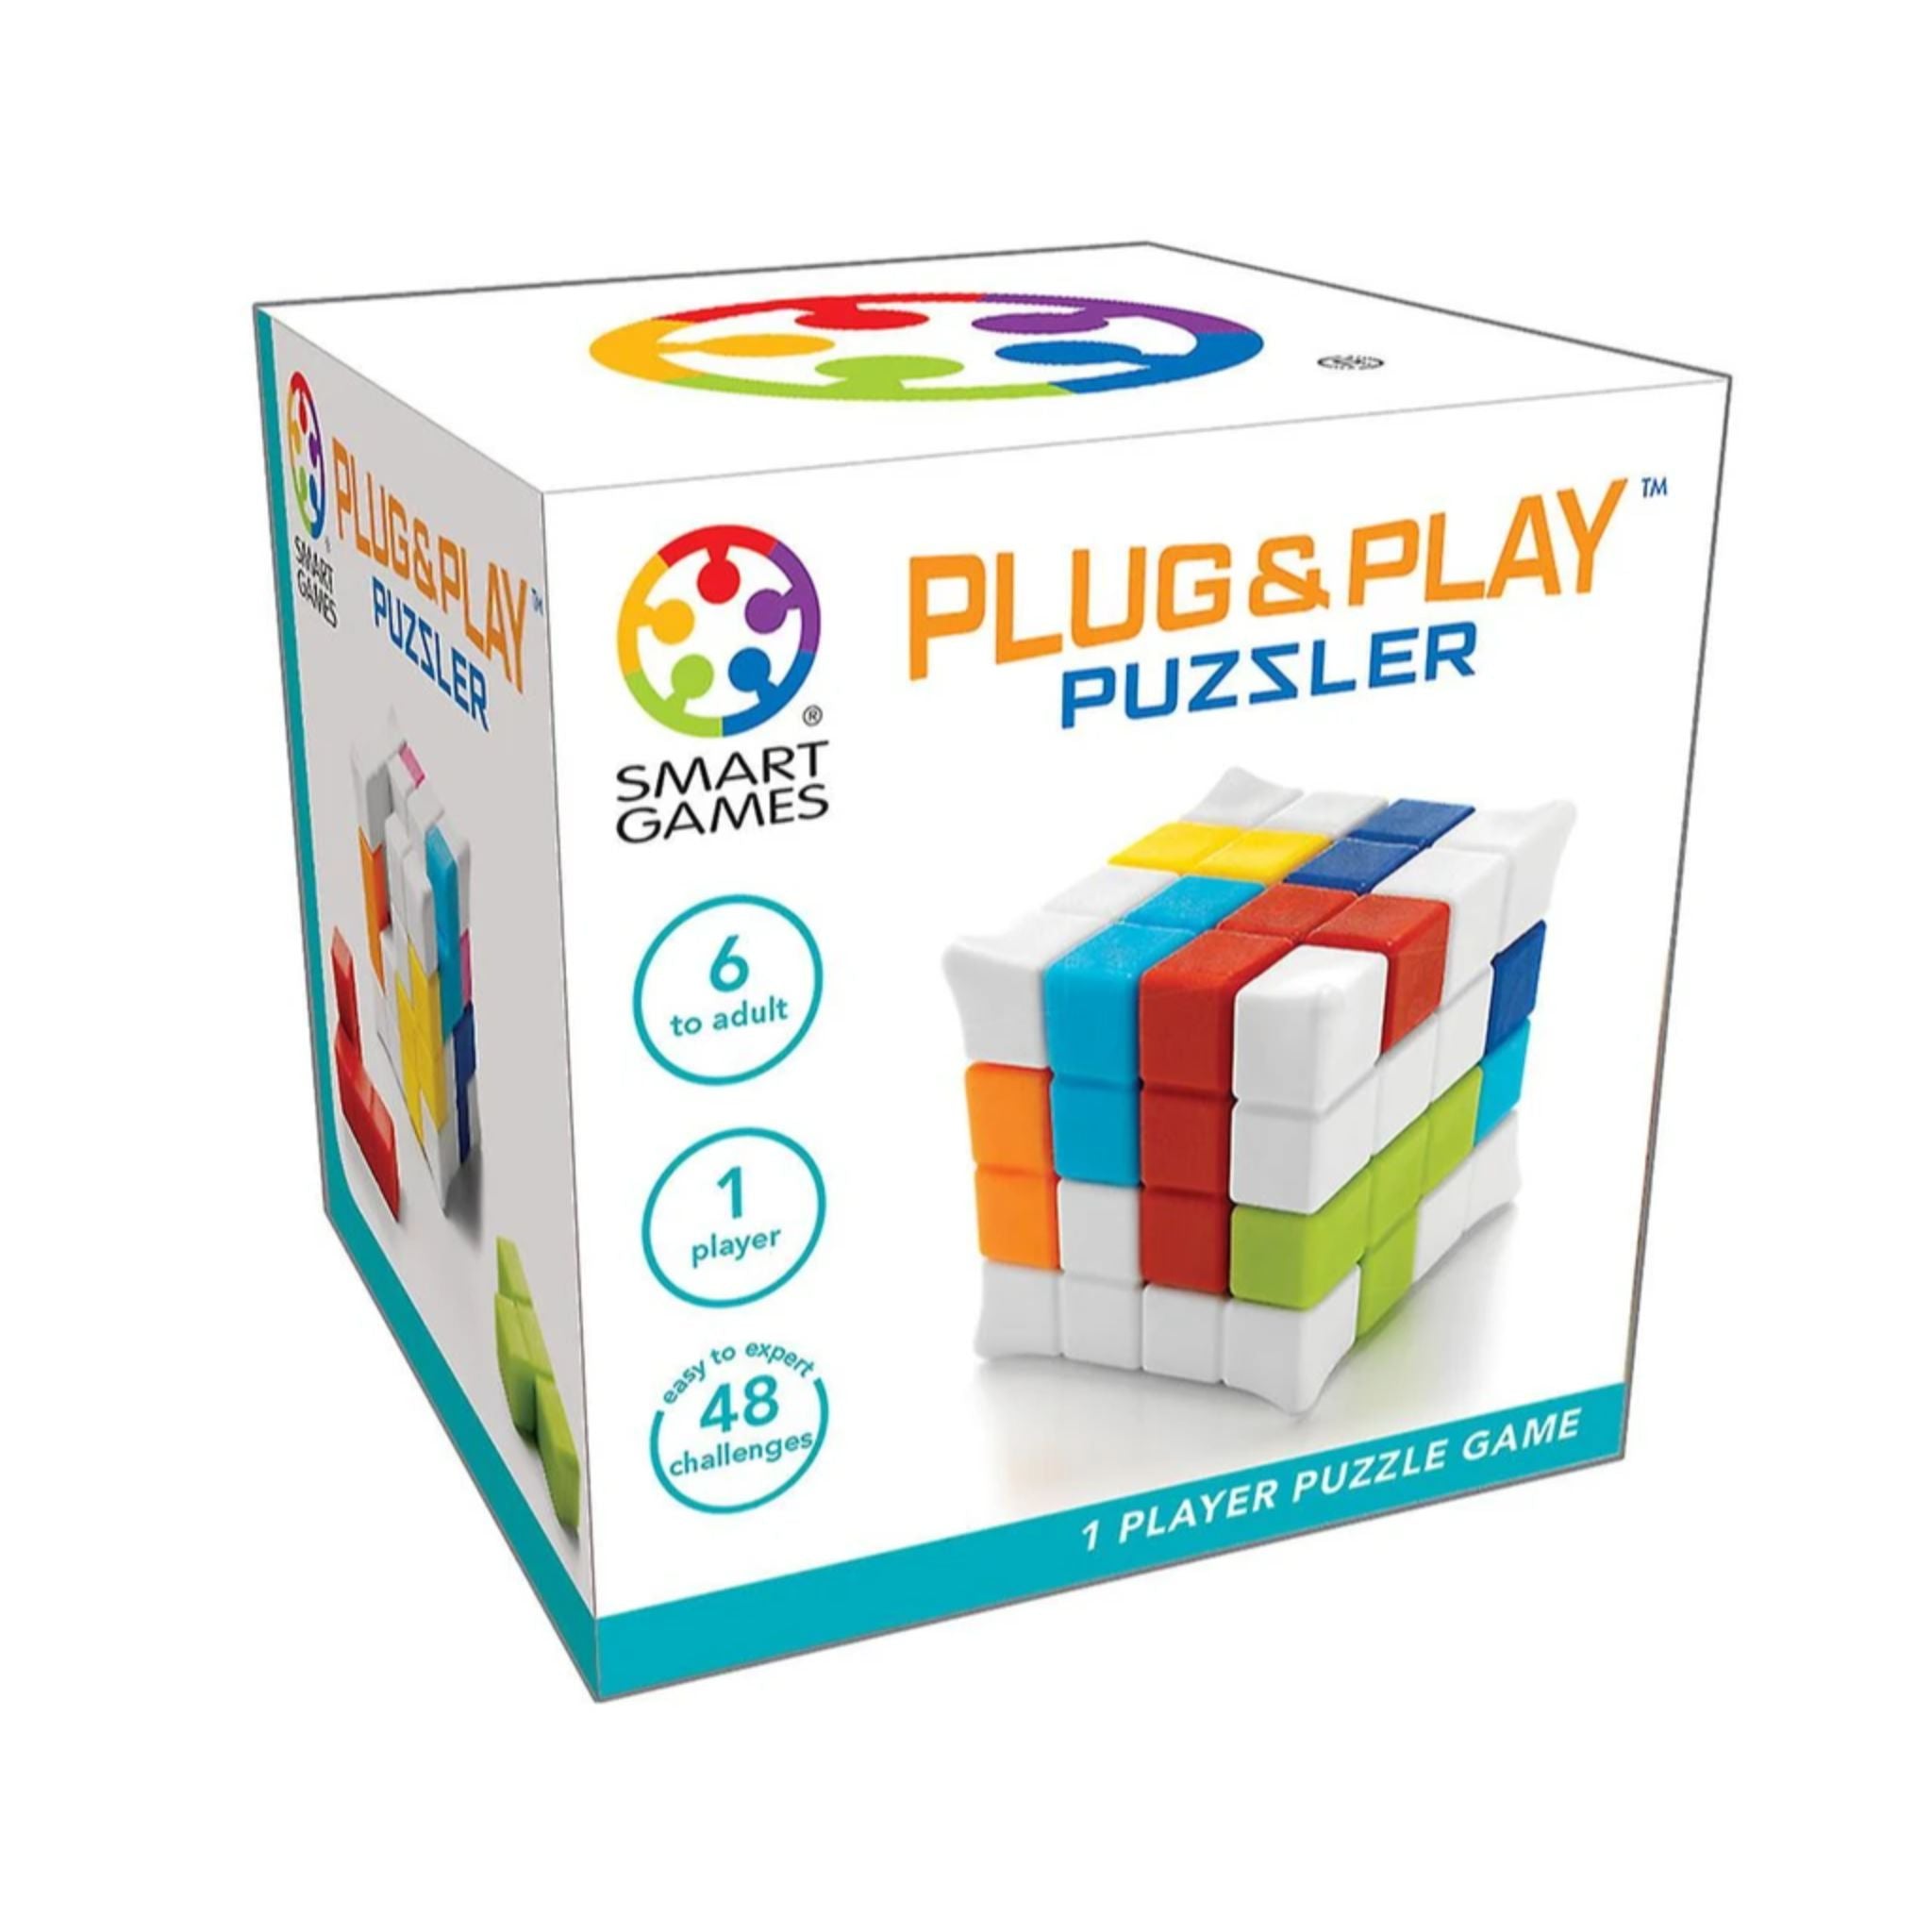 Smart Games Plug & Play Puzzler